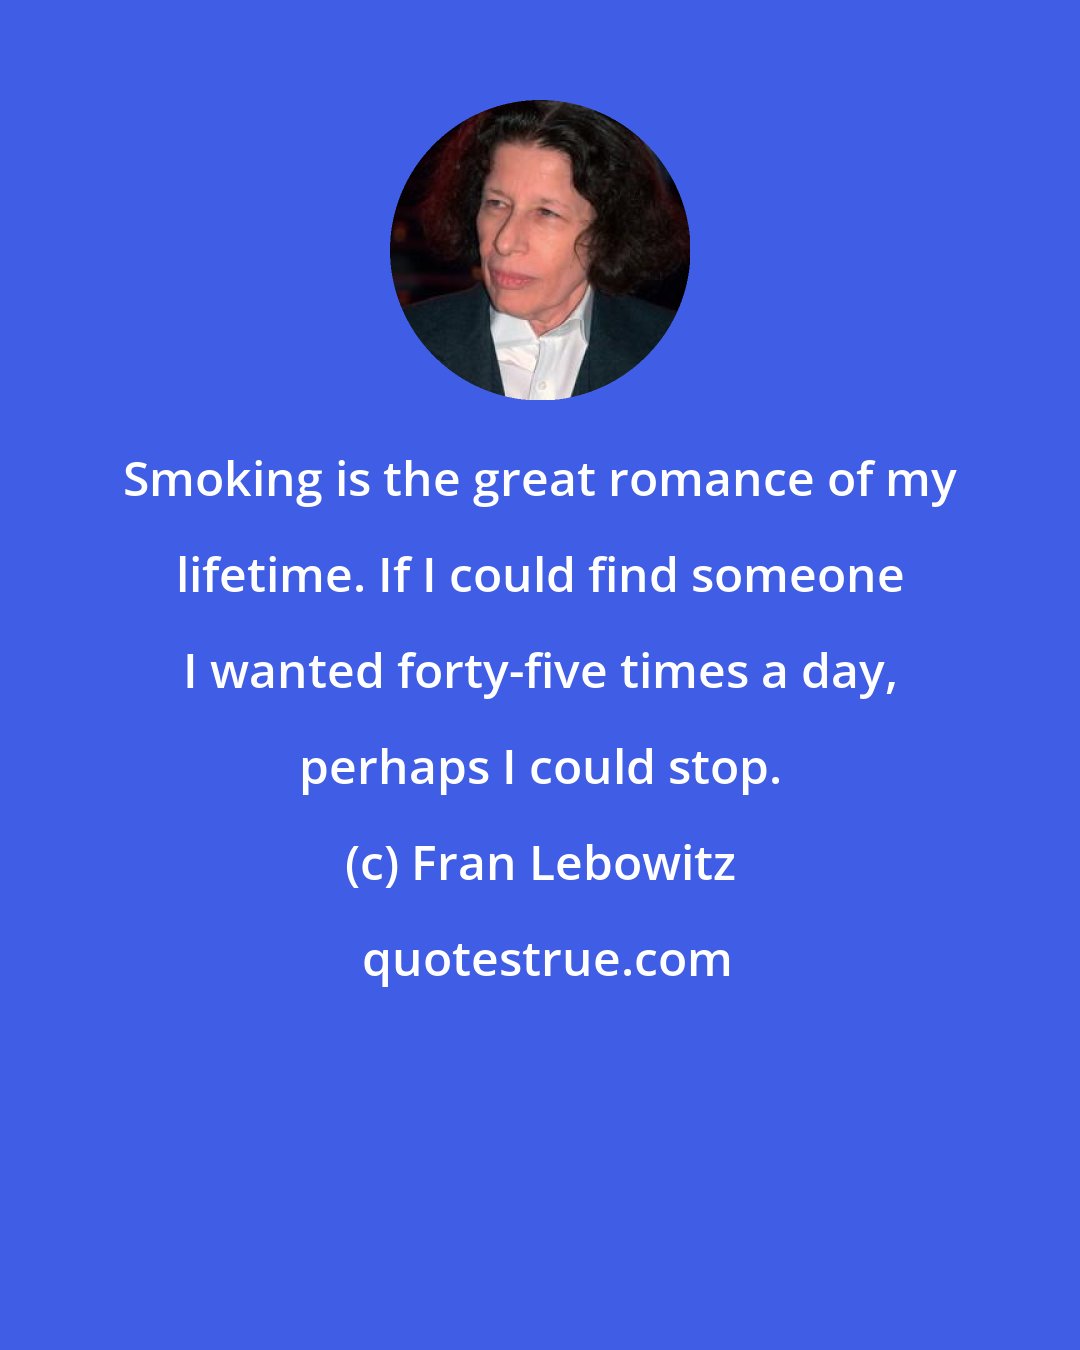 Fran Lebowitz: Smoking is the great romance of my lifetime. If I could find someone I wanted forty-five times a day, perhaps I could stop.